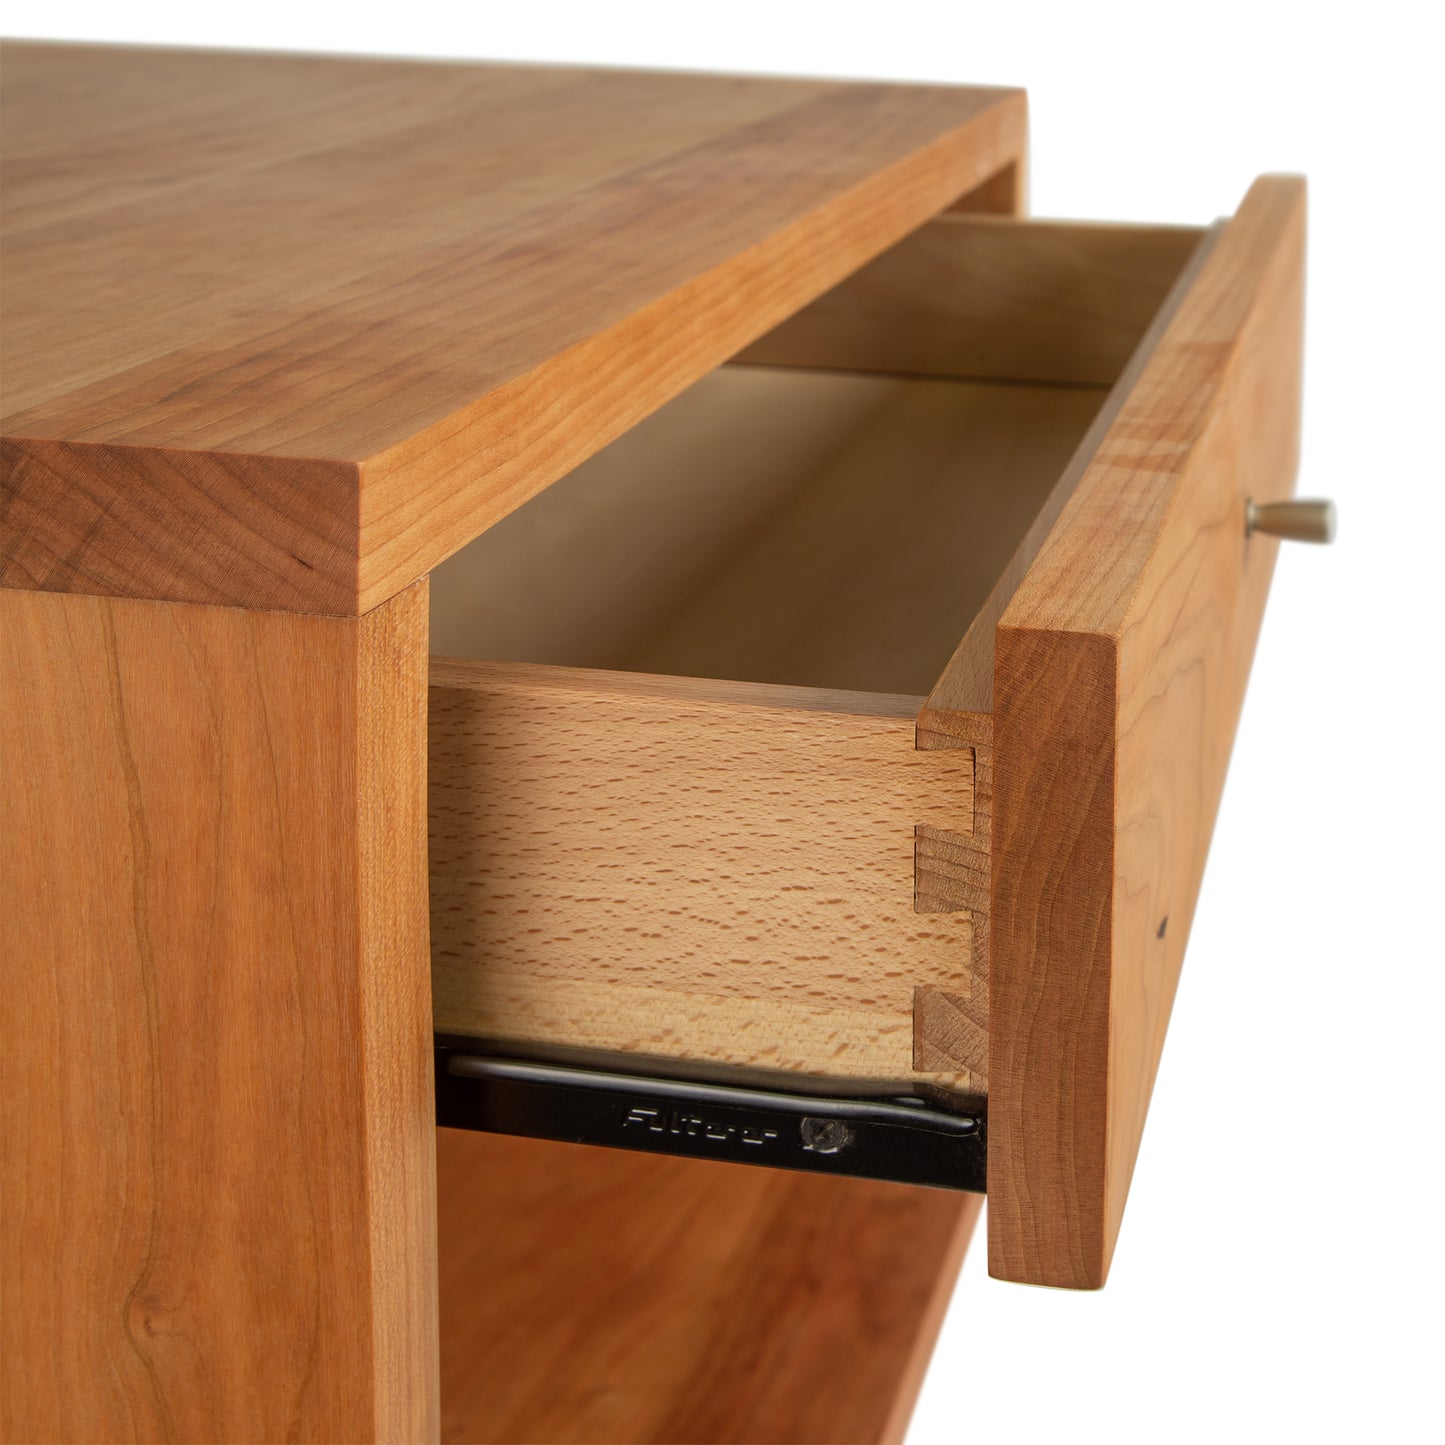 Vermont Furniture Designs Larssen 1-Drawer Wide Nightstand with an open drawer showing dovetail joint construction.